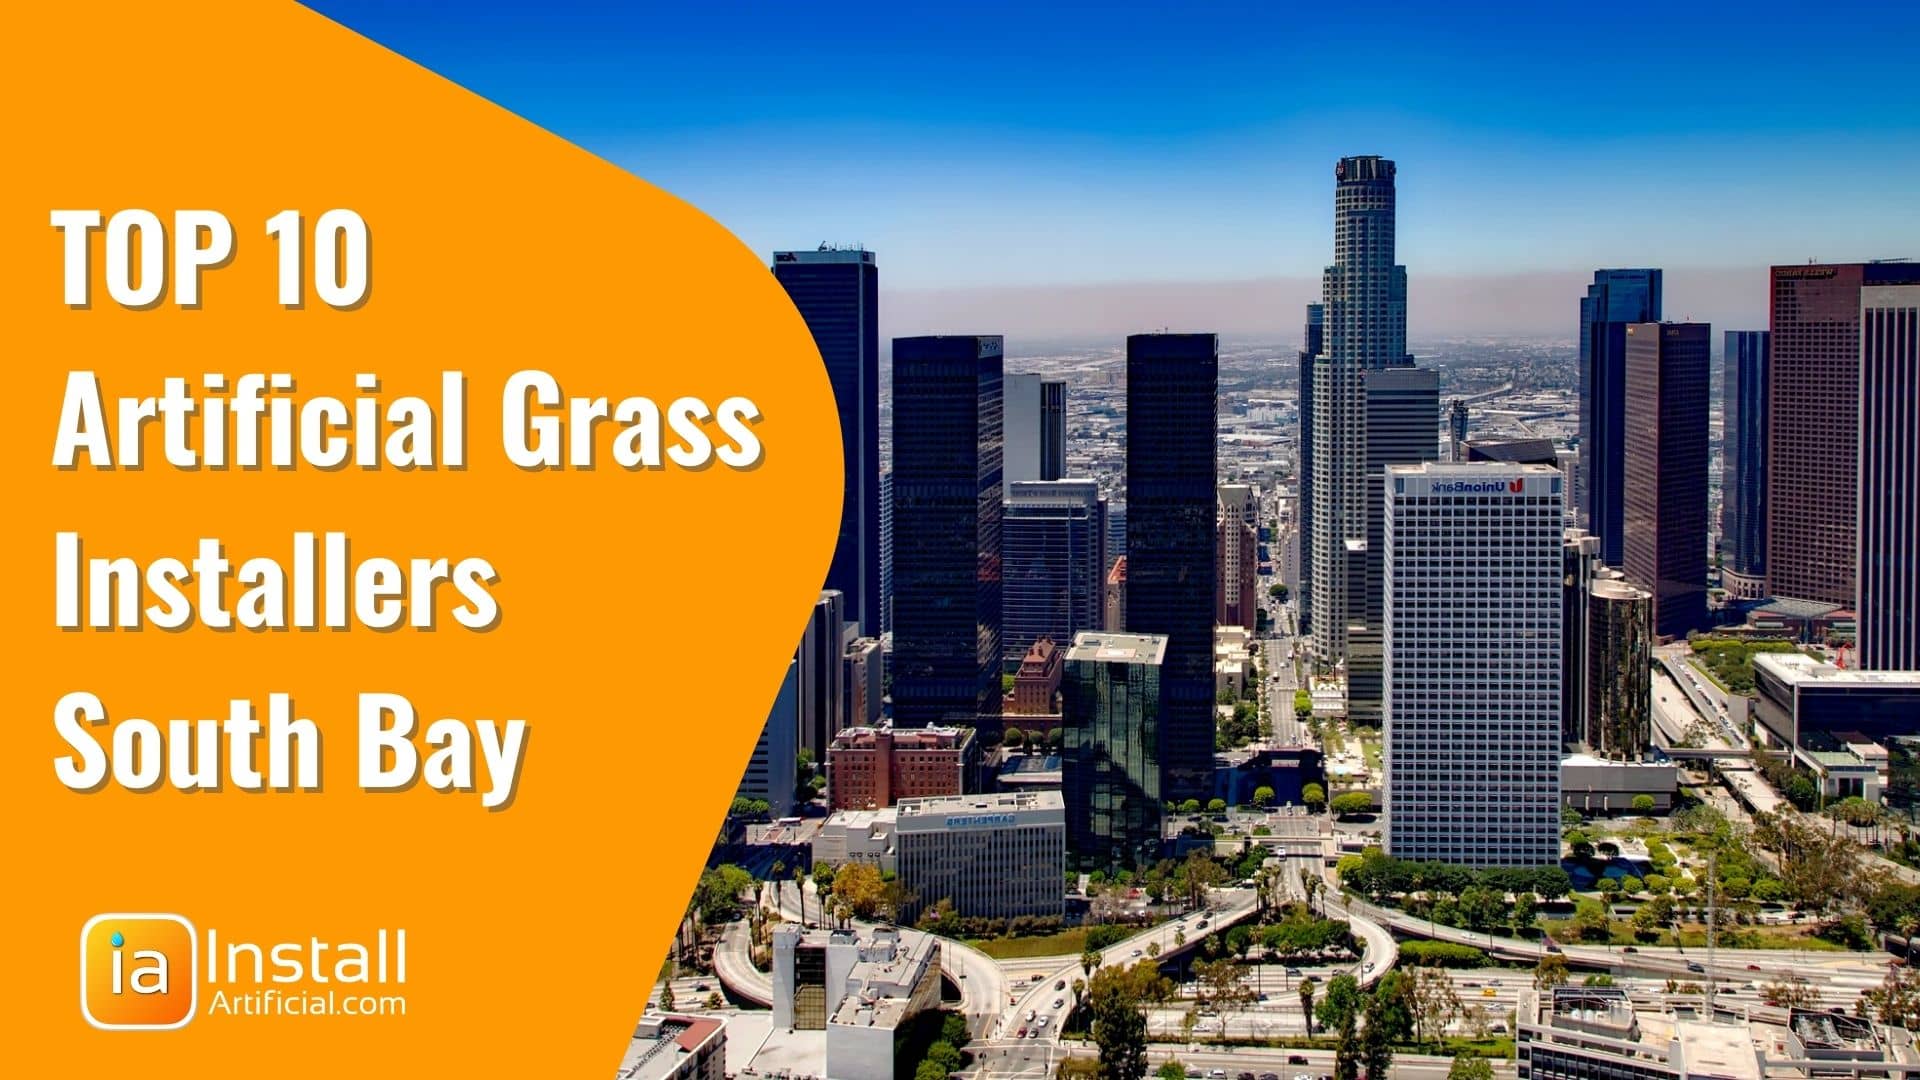 Top 10 Best Artificial Turf Installers in South Bay